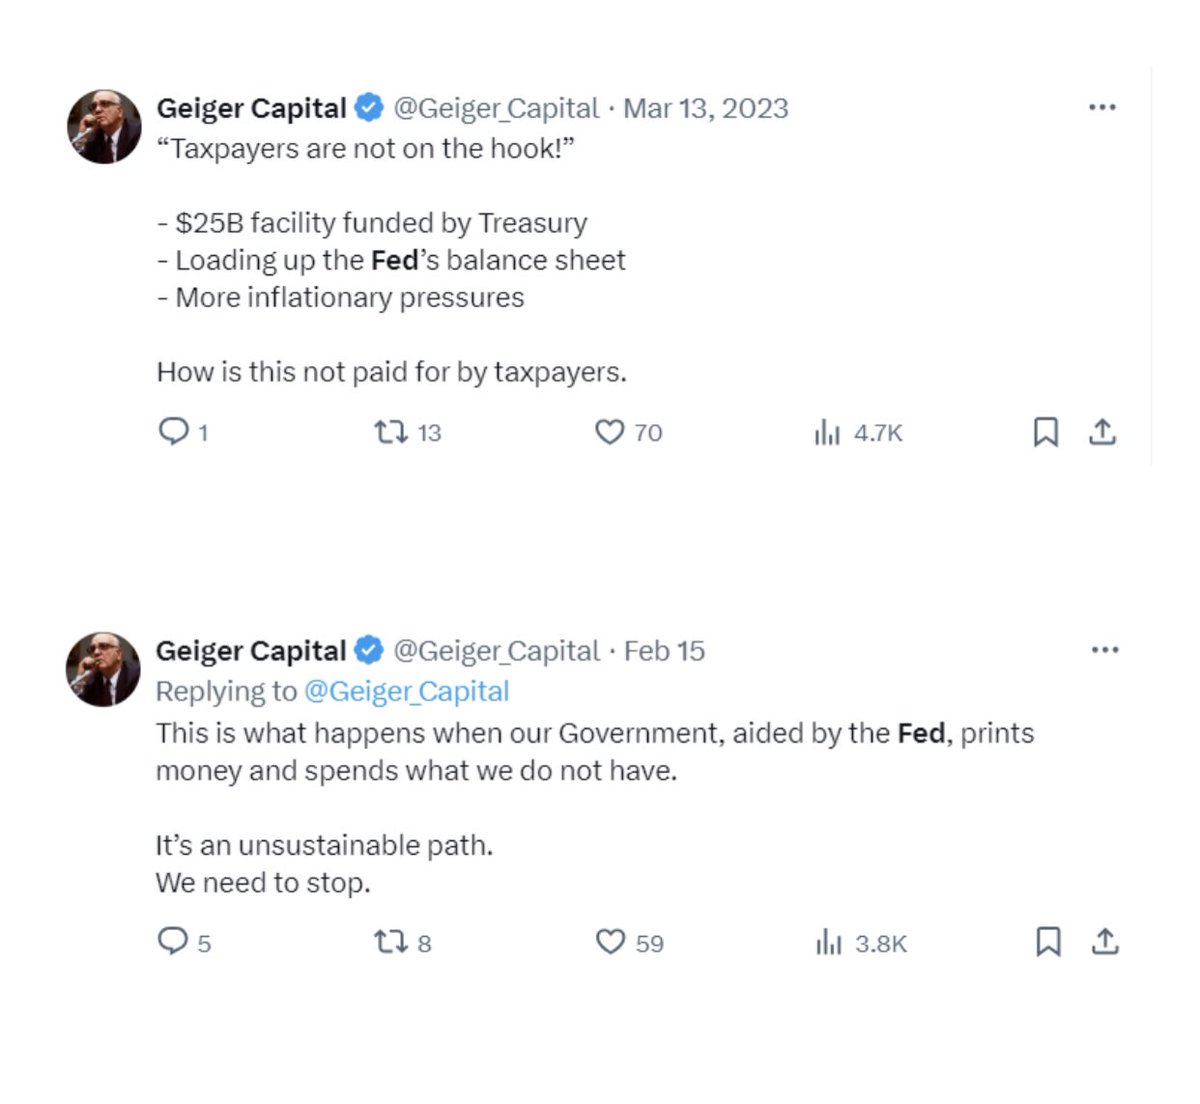 @Geiger_Capital Even more insane is that you don’t realize you’re in the same boat as him (possibly worse?!) when it comes to understanding monetary mechanics!! Watch the rest of that movie and you’ll see how these tweets are just as insane 😂